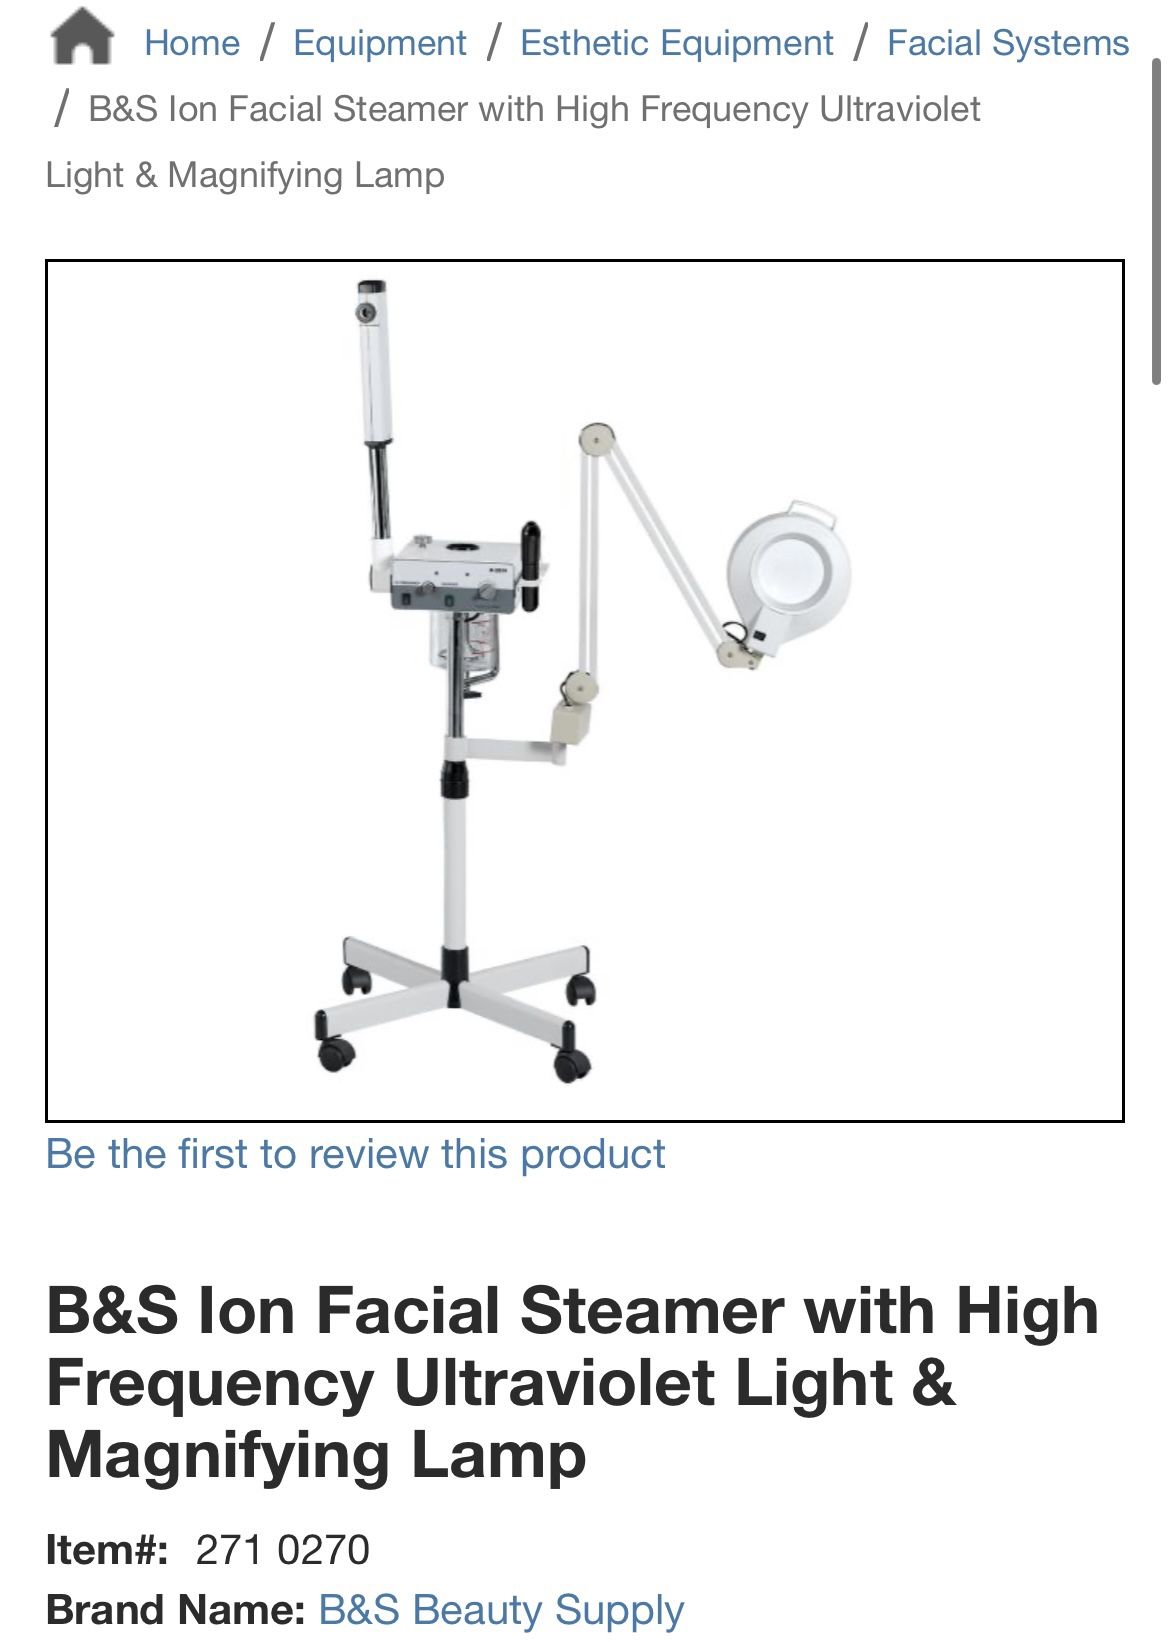 NEW B&S Ion Facial Steamer with High Frequency Ultraviolet Light & Magnifying Lamp